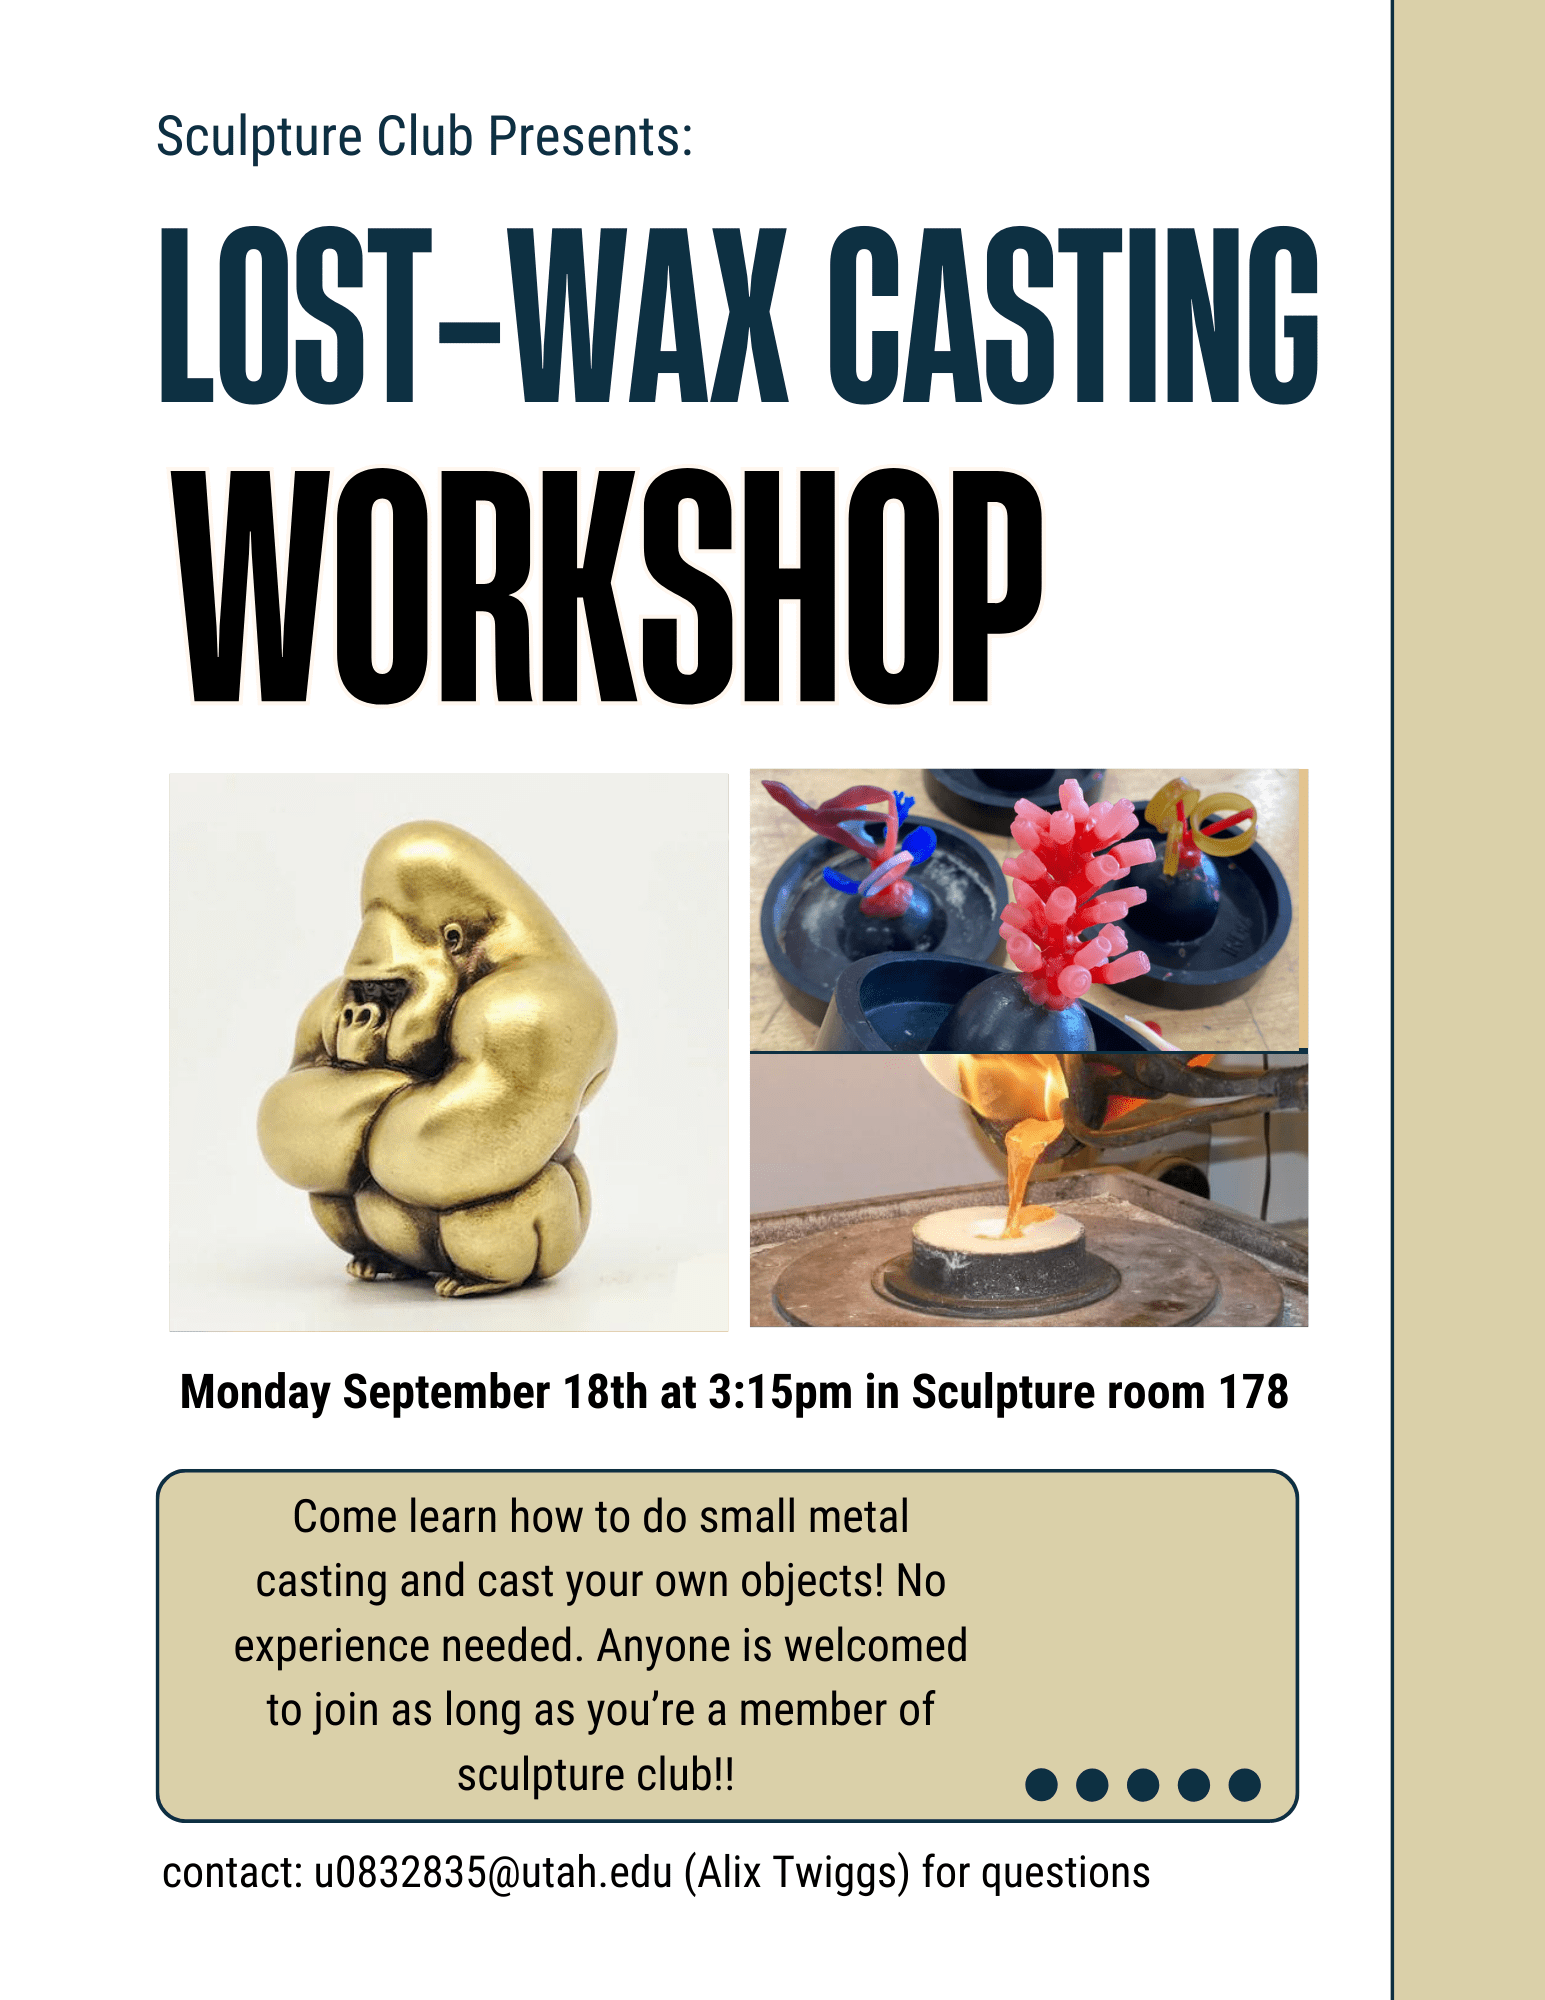 Poster for the Lost-Wax casting workshop